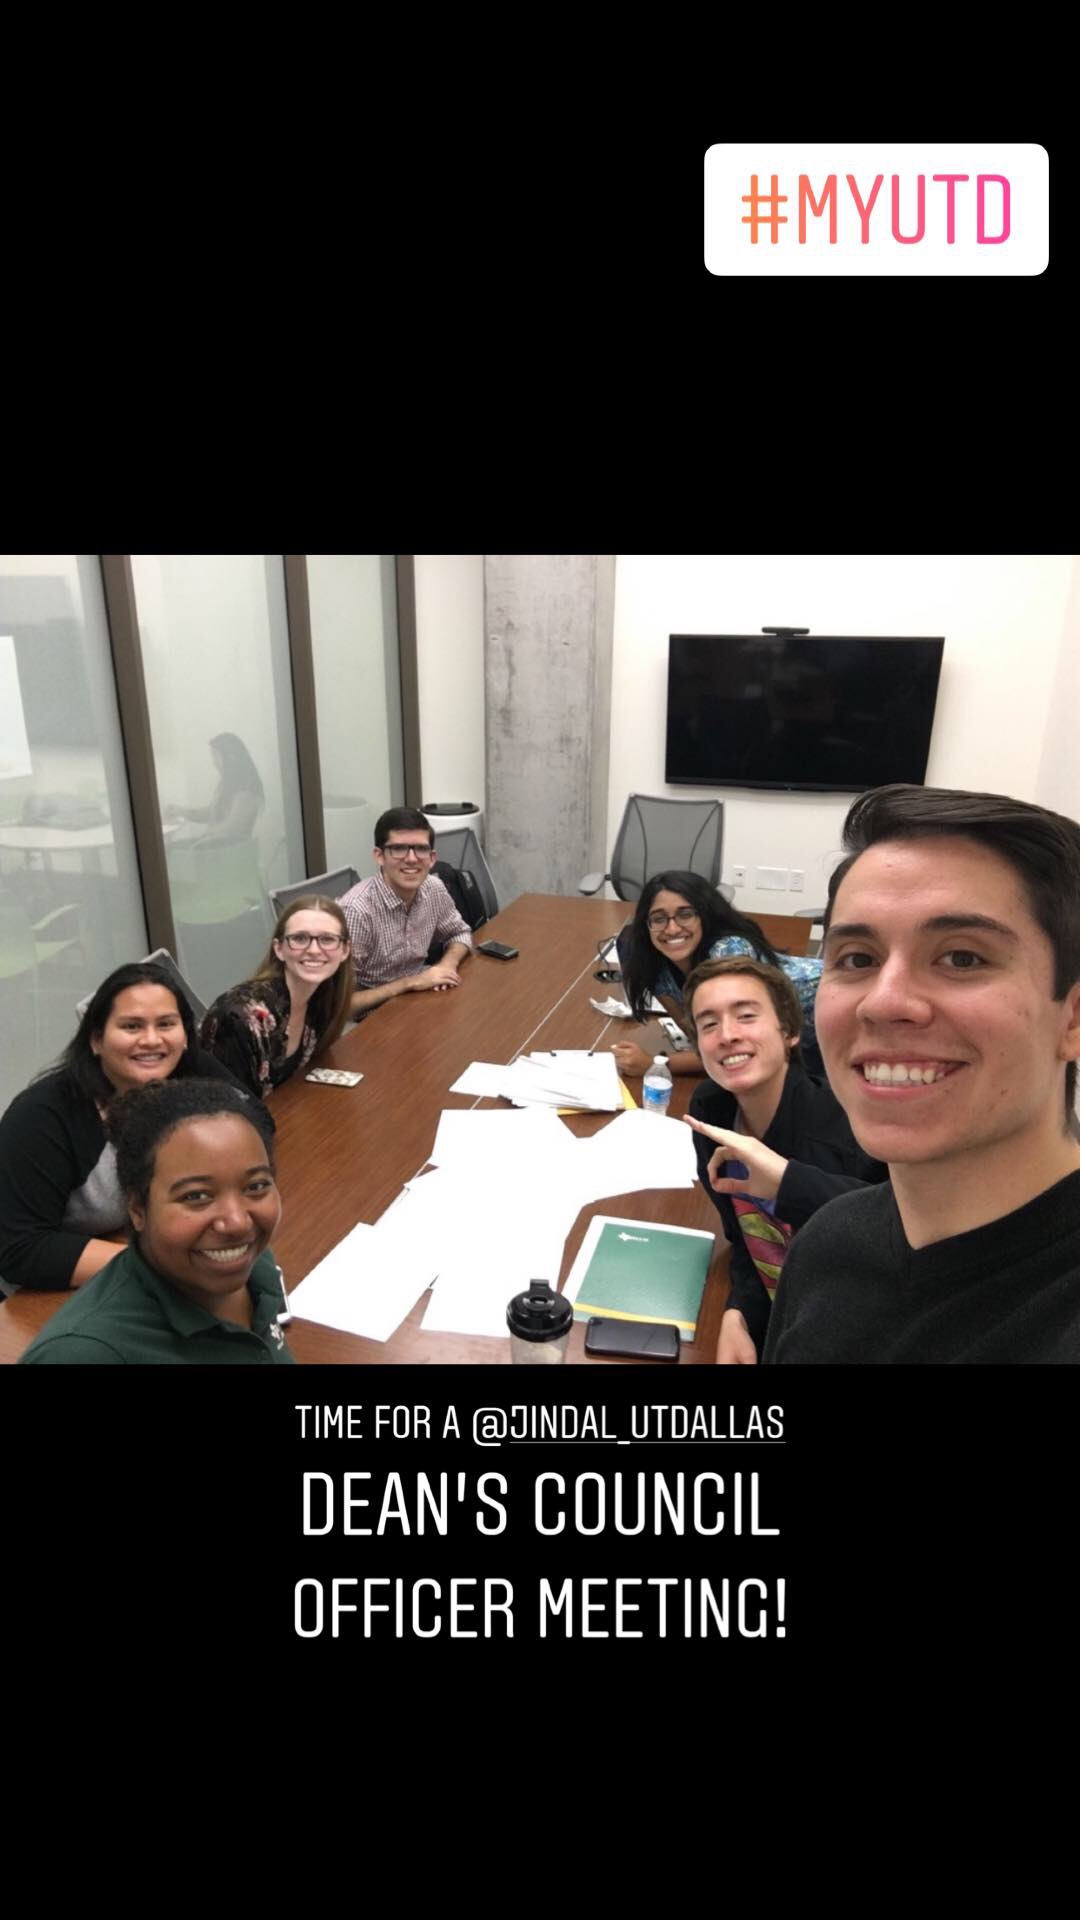 Charlie and six others take a group selfie while seated around a conference table.